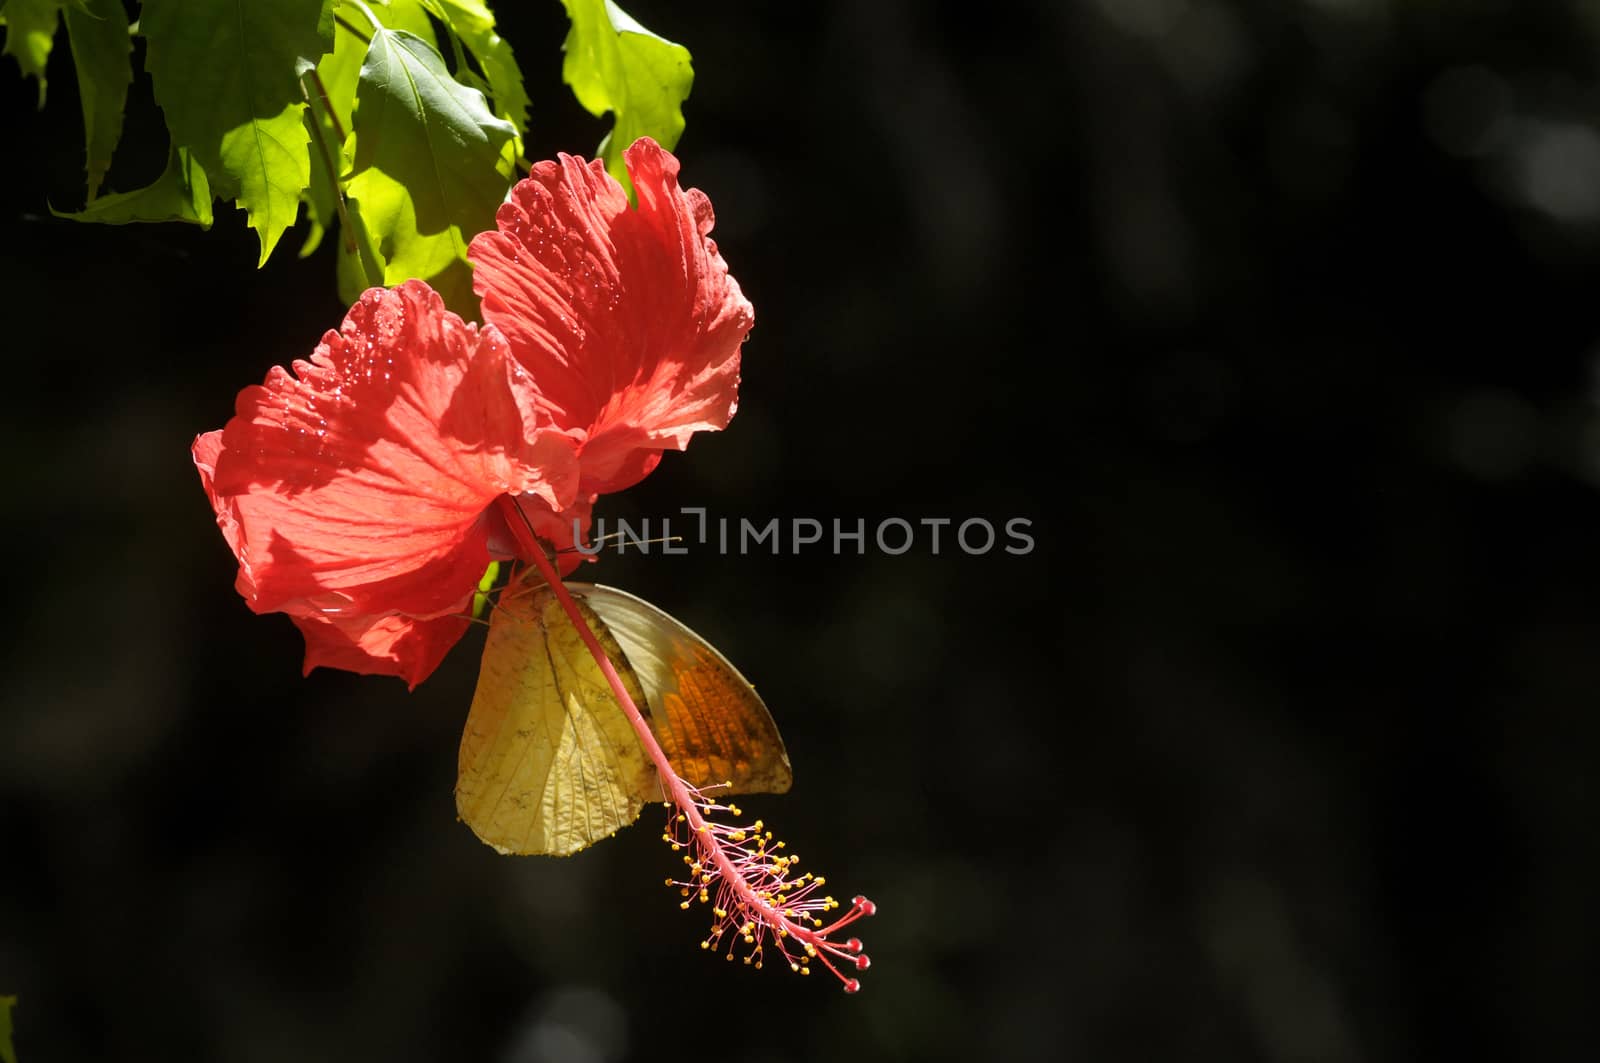 butterfly on the hibiscus flower by antonihalim